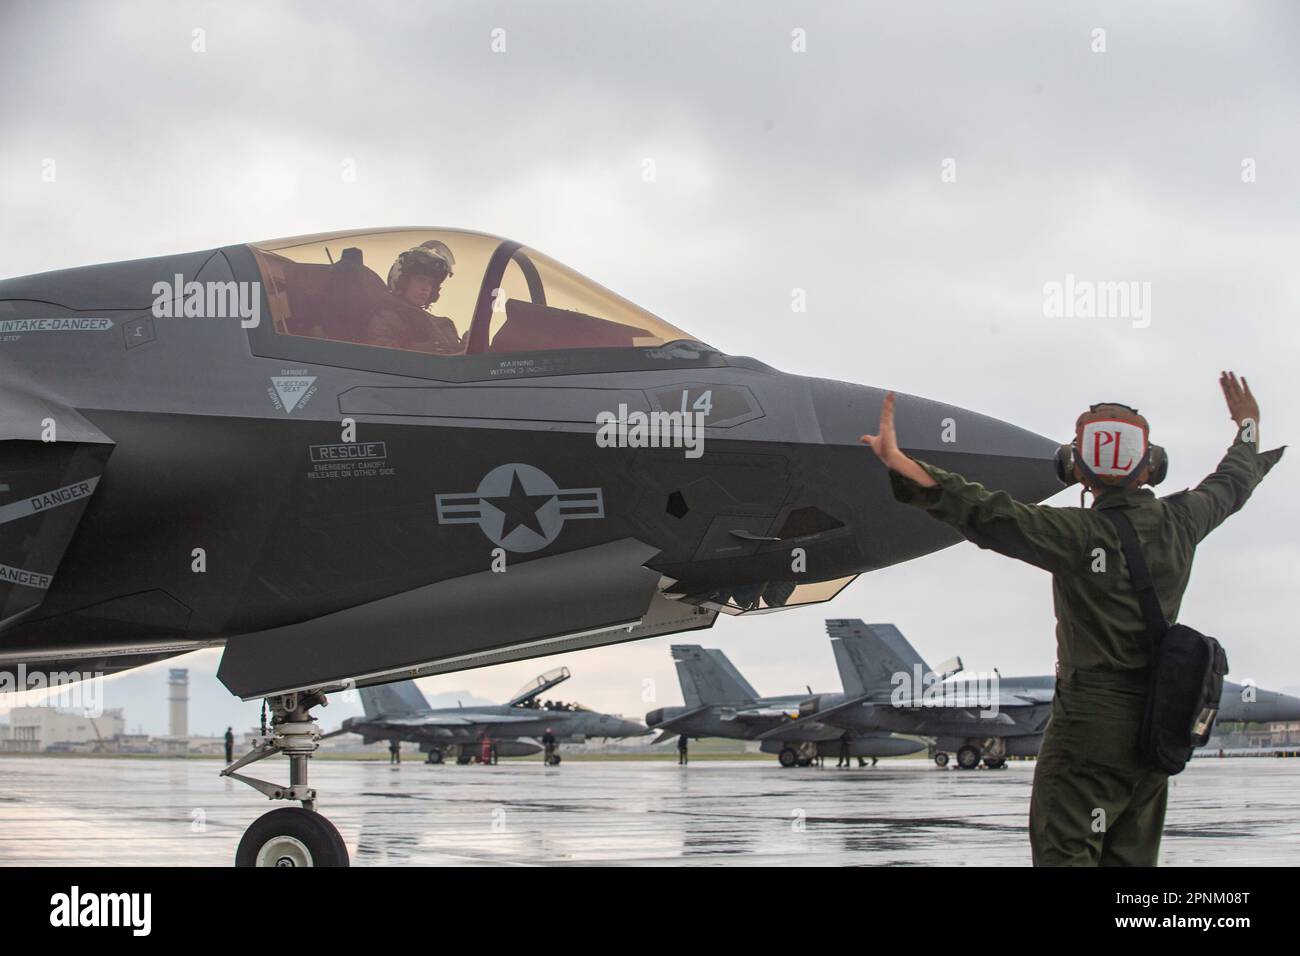 U.S. Marine Corps Cpl. Dylan Chavez, a fixed-wing aircraft mechanic with Marine Fighter Attack Squadron 242, guides an F-35B Lightning II aircraft with VMFA-242 at Marine Corps Air Station Iwakuni, Japan, April 12, 2023. Marines with Marine Aircraft Group 12 and U.S. Navy Sailors with Carrier Air Wing Five conducted a joint, live missile shoot over the Pacific to sustain their high-level of weapon proficiency, while serving as forward-postured aviation units in the Indo-Pacific region. (U.S. Marine Corps photo by Sgt. Jose Angeles) Stock Photo